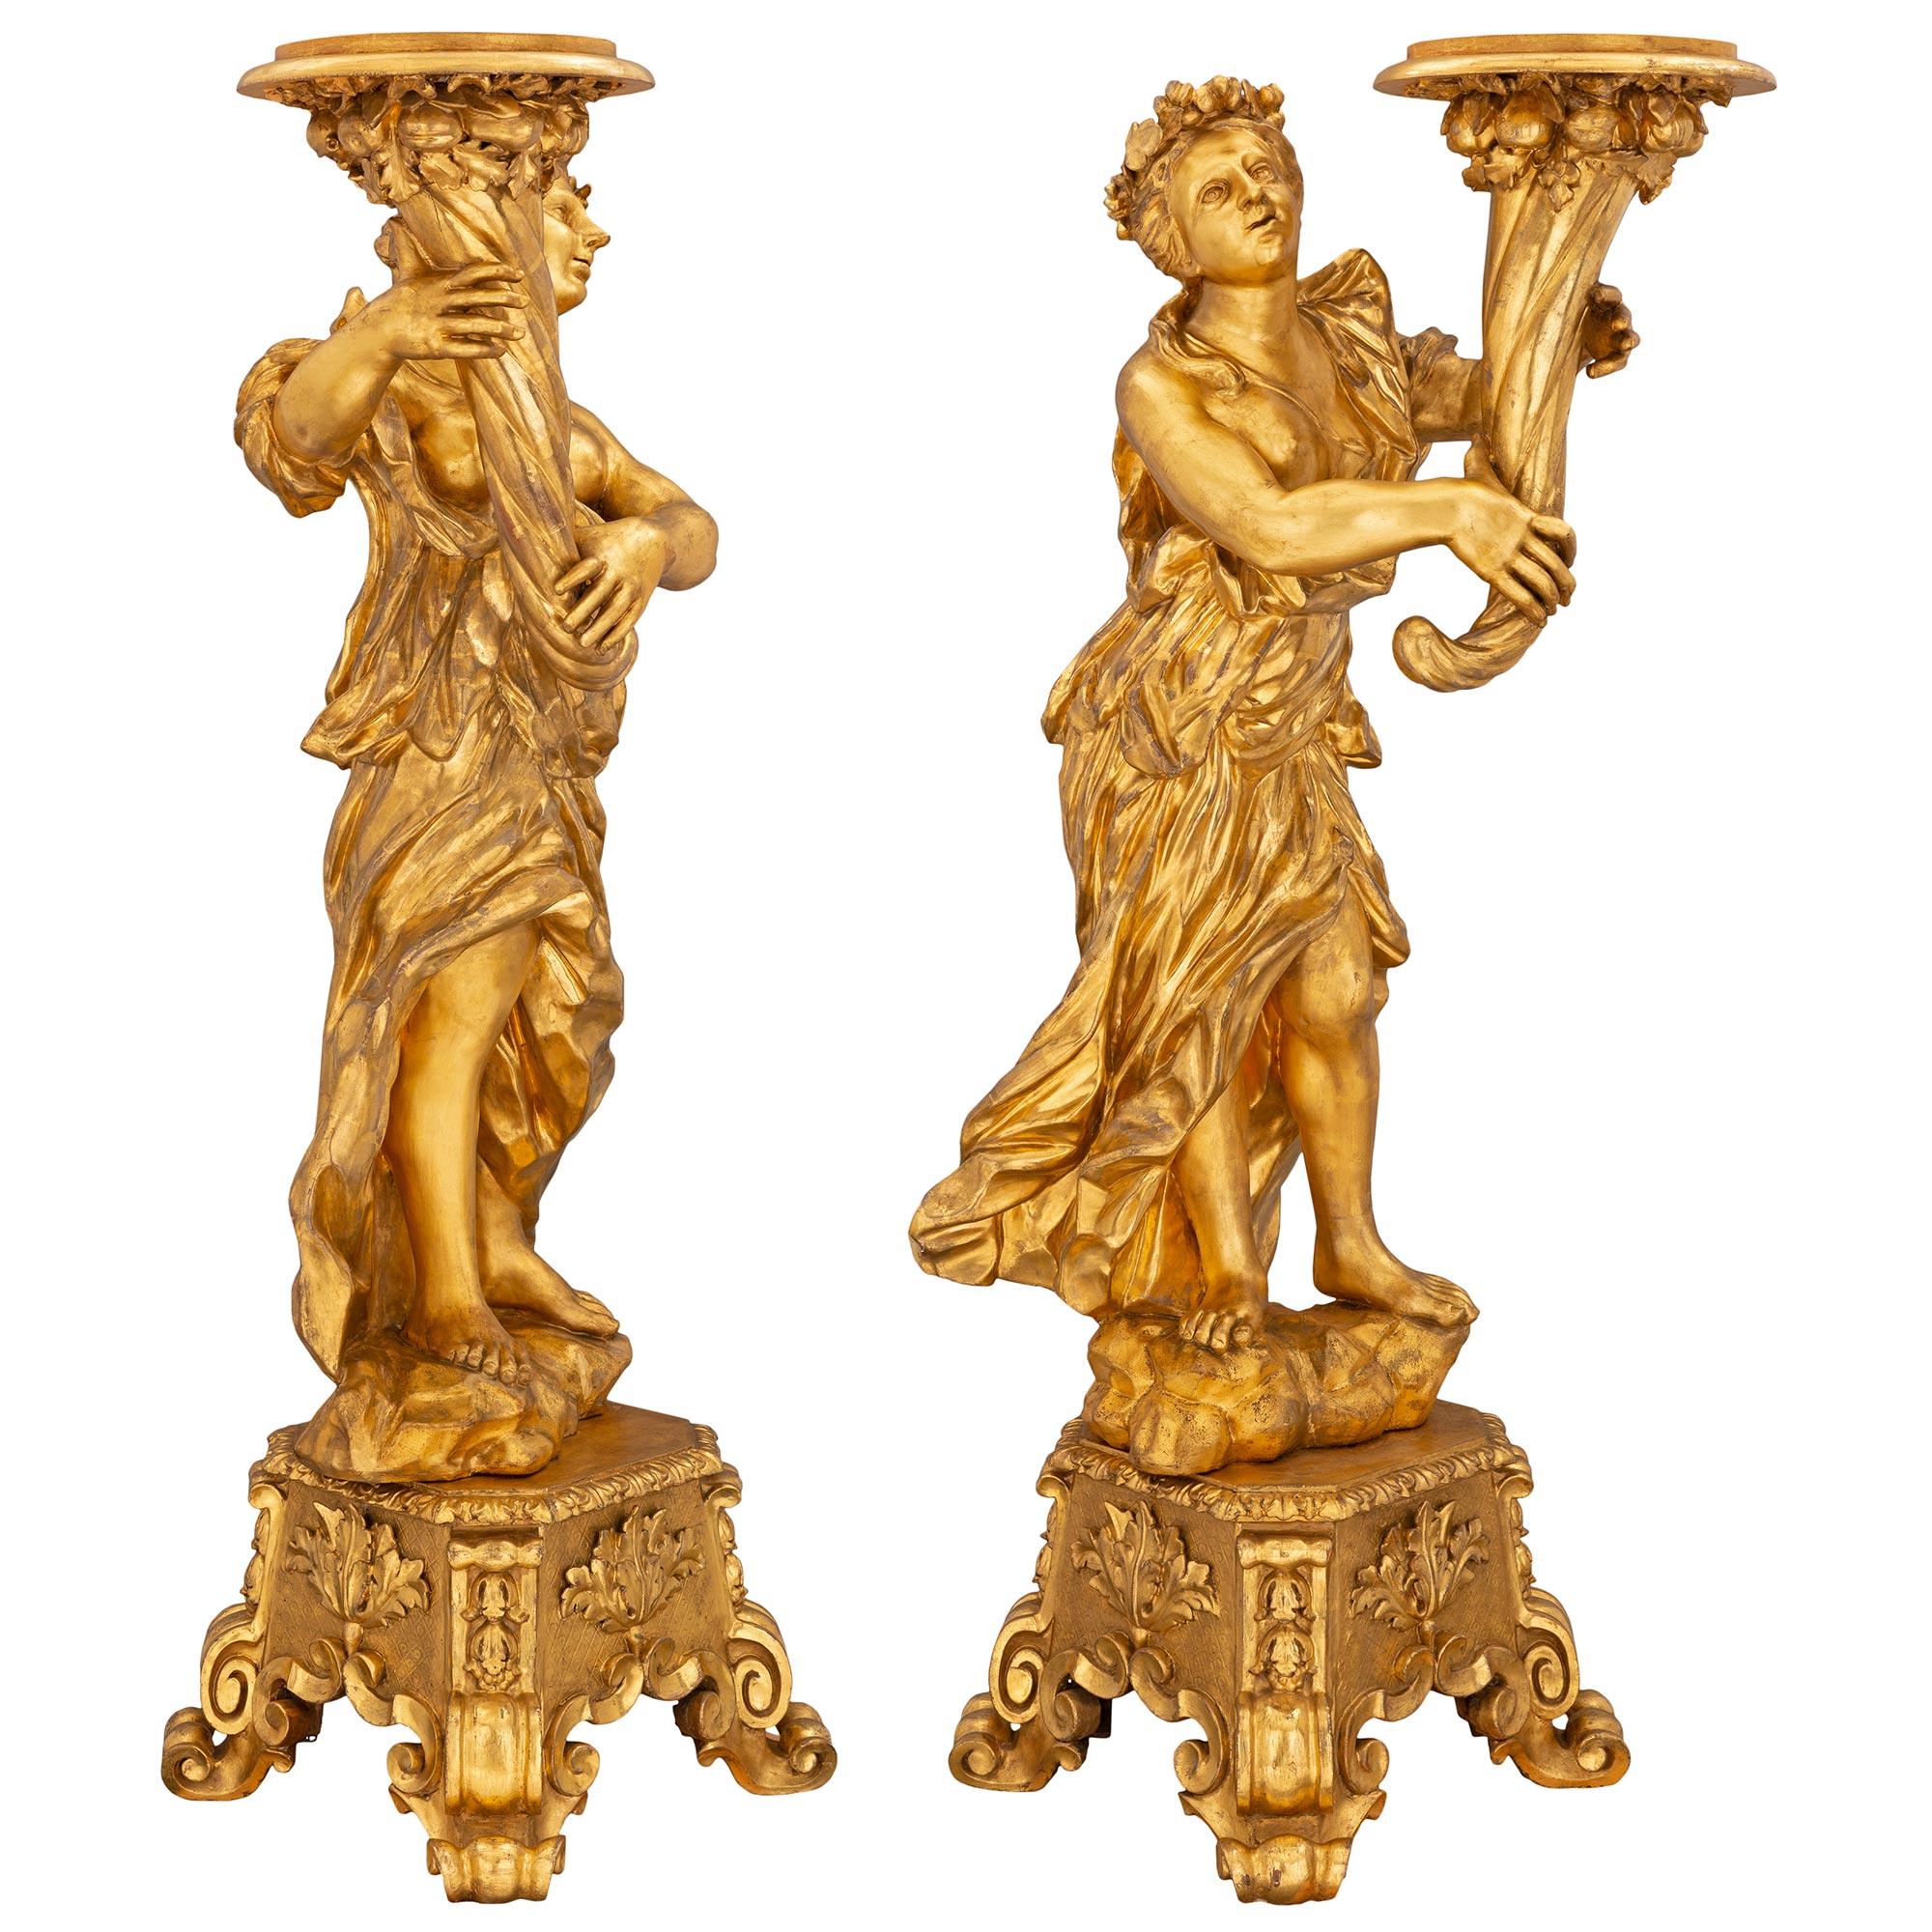 Pair of Italian Late 17th Century Baroque Period Giltwood Torchières In Good Condition For Sale In West Palm Beach, FL